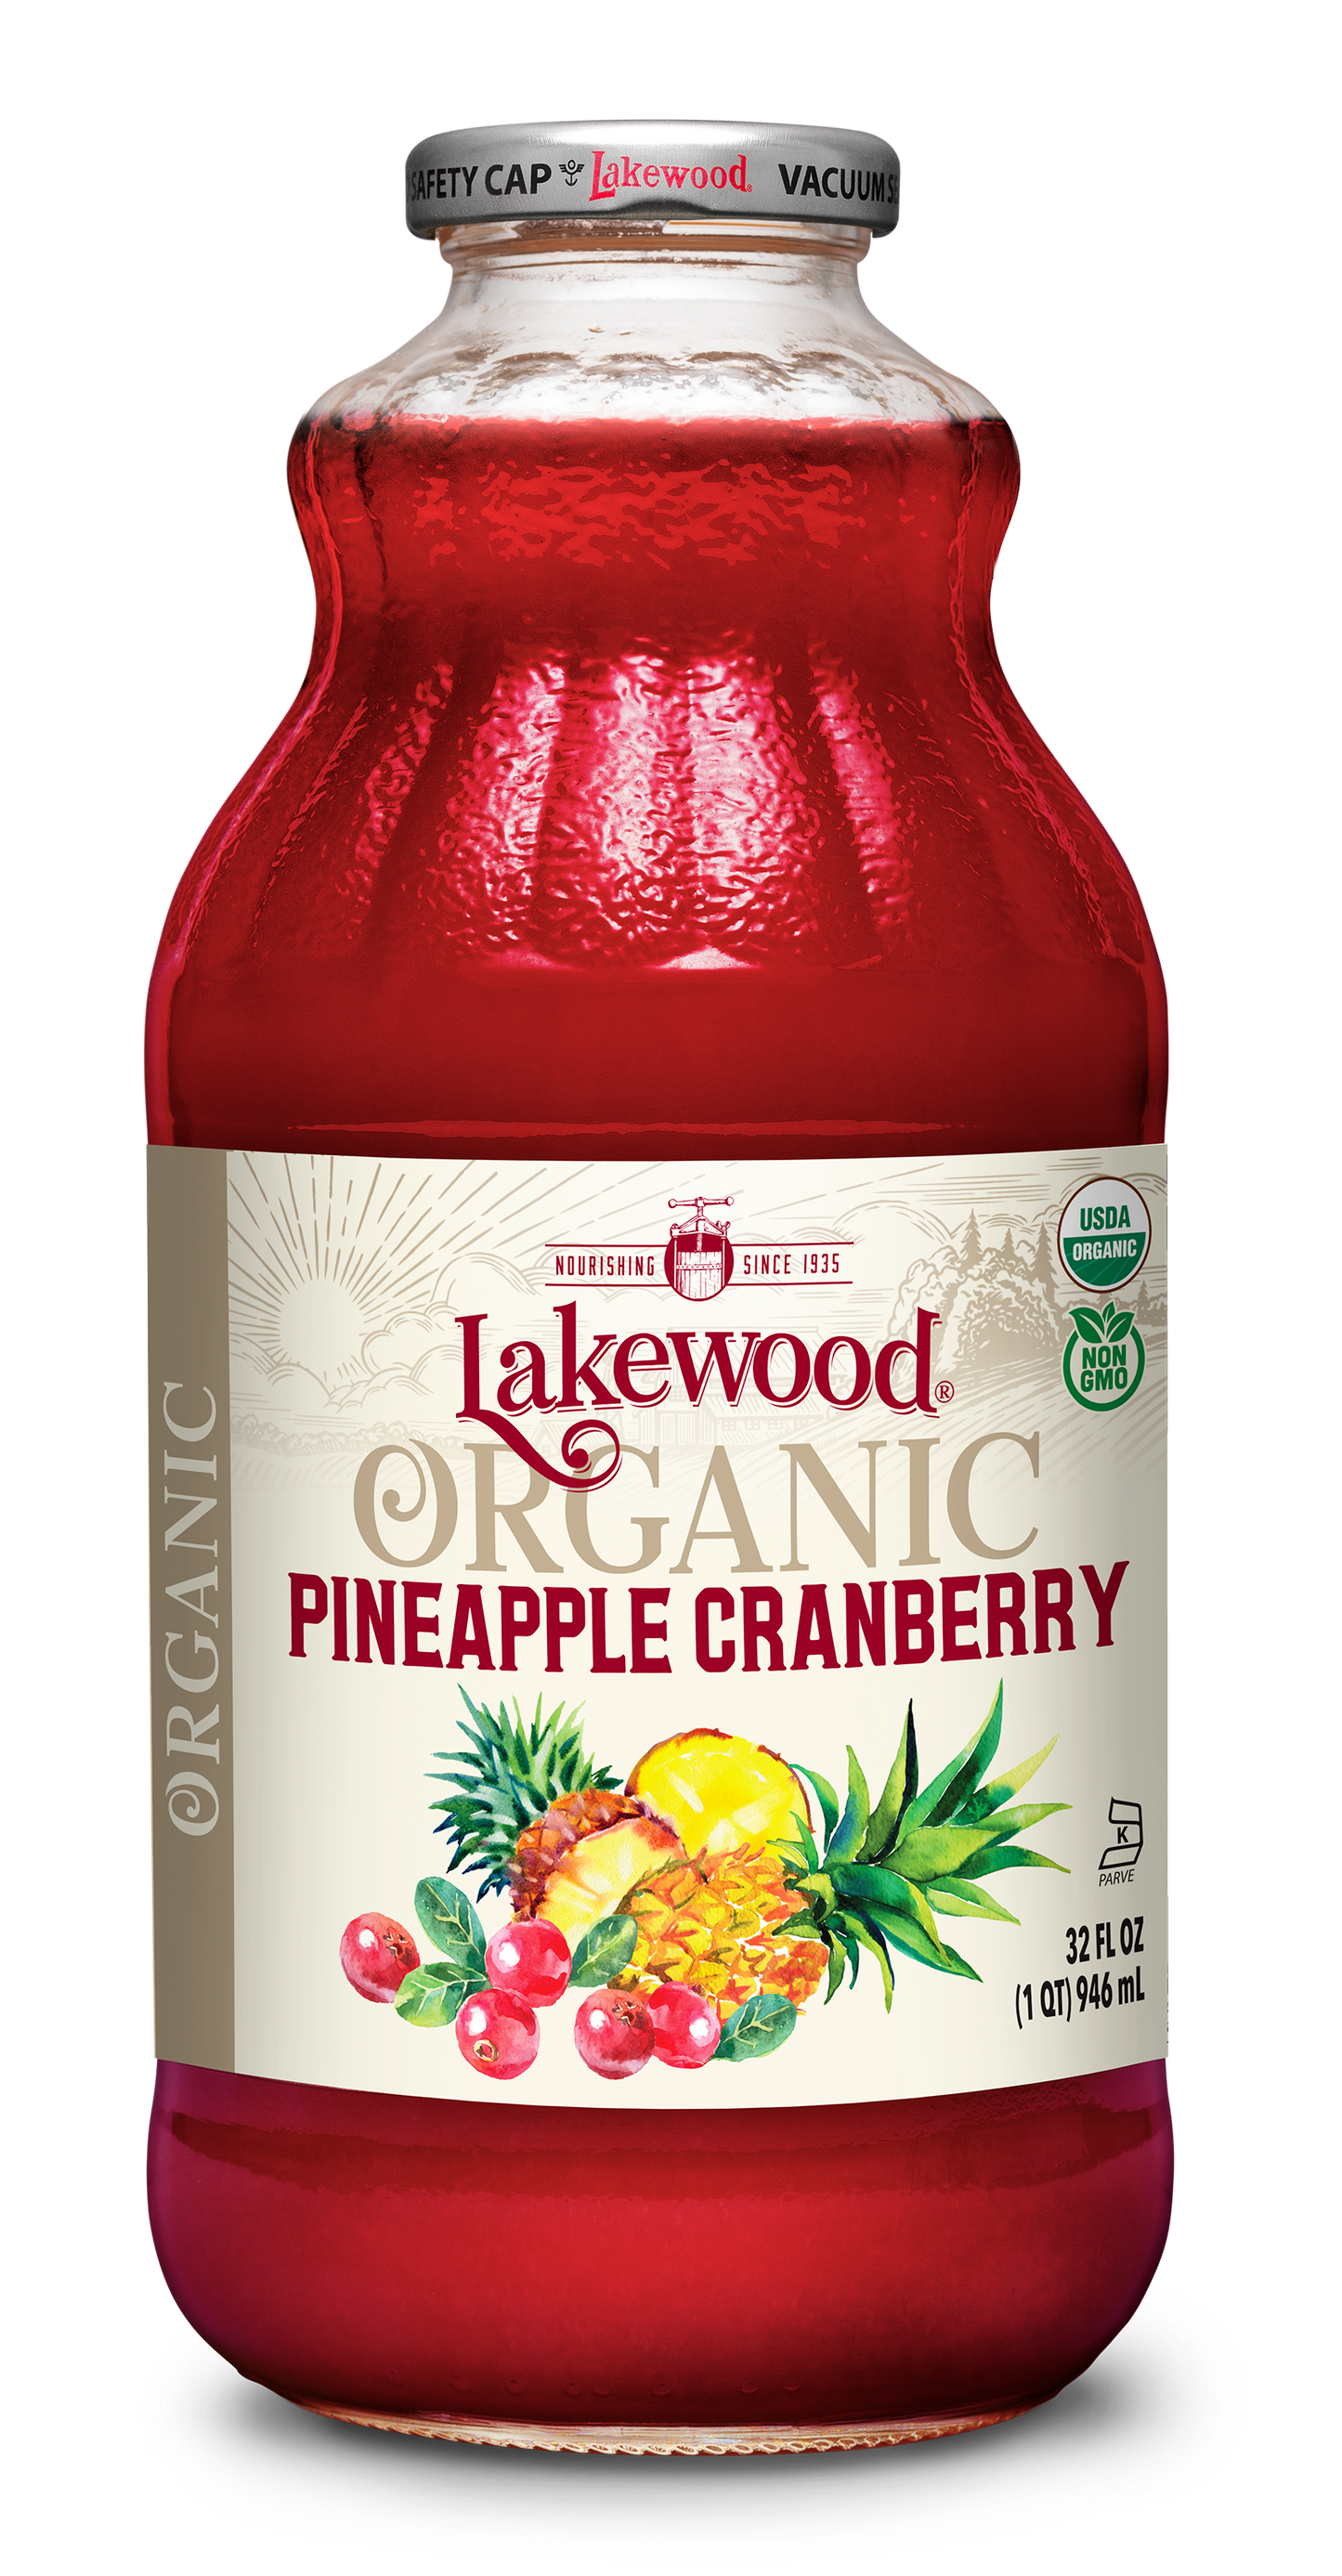 Organic Pineapple Cranberry (32 oz, 2-pack or 6-pack)